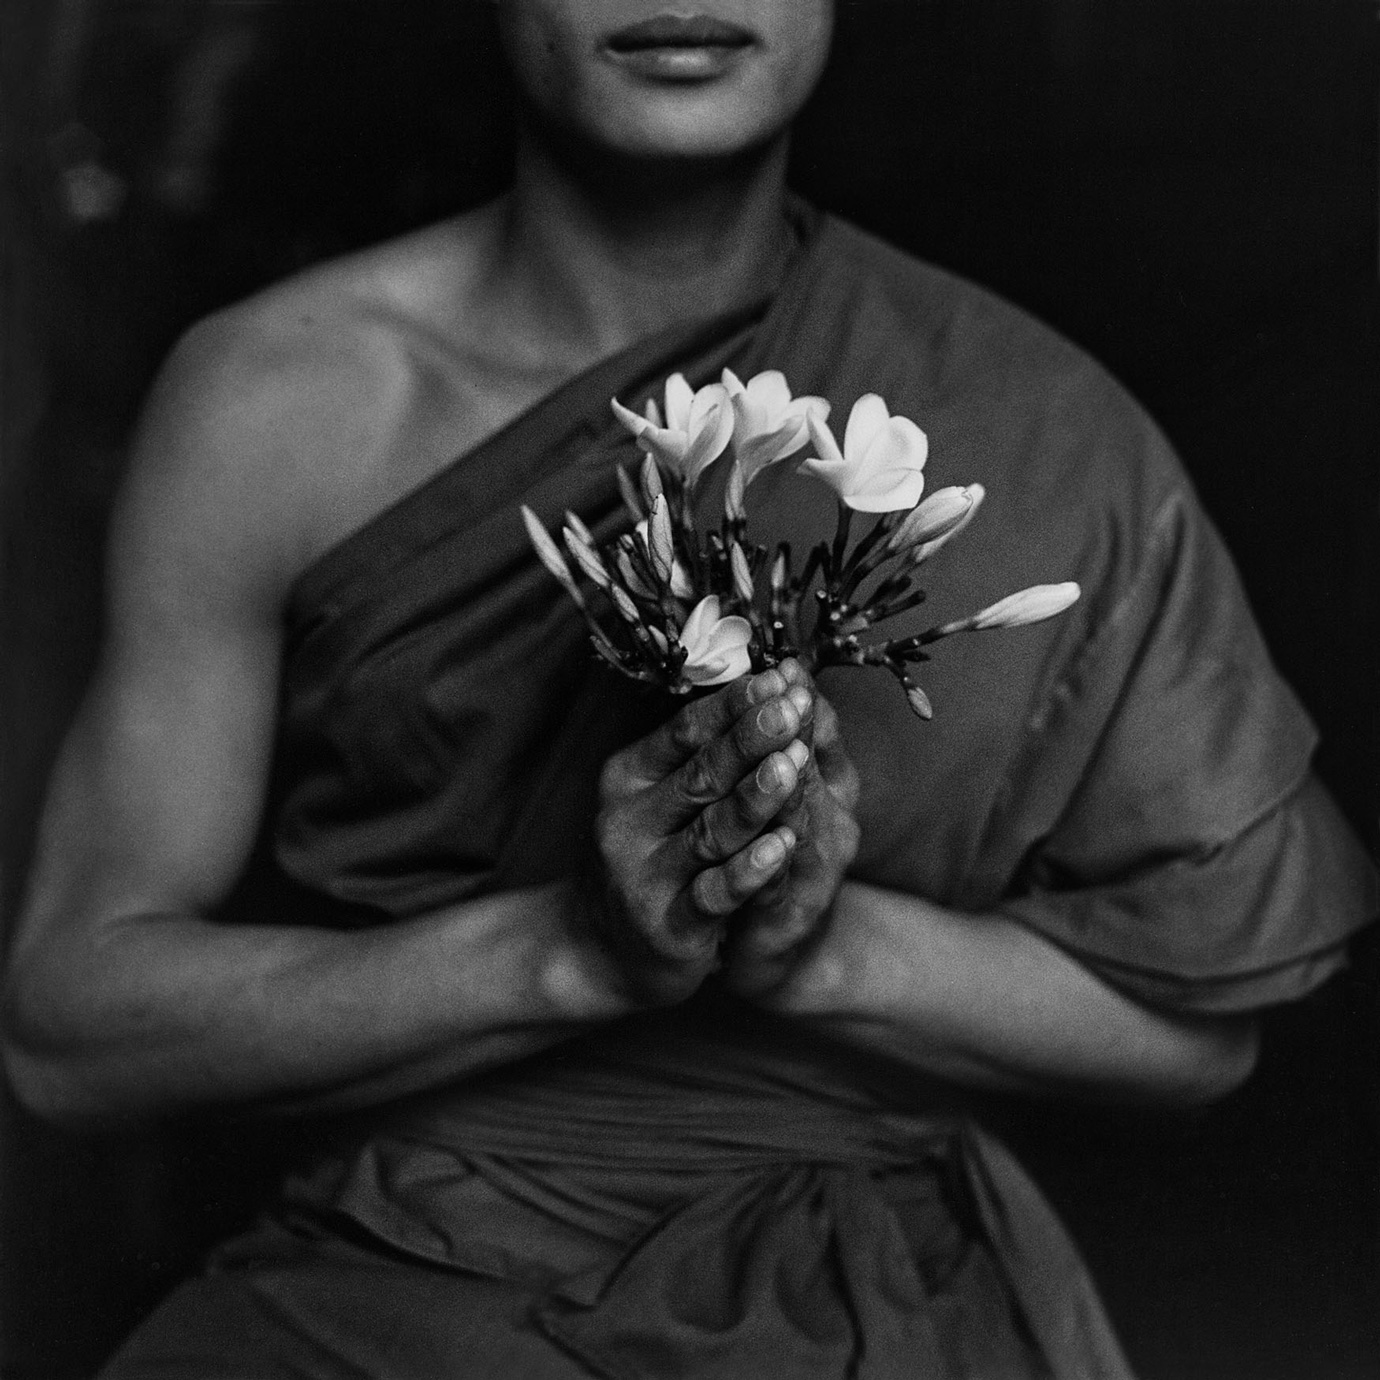 Flower Offering to the Buddha